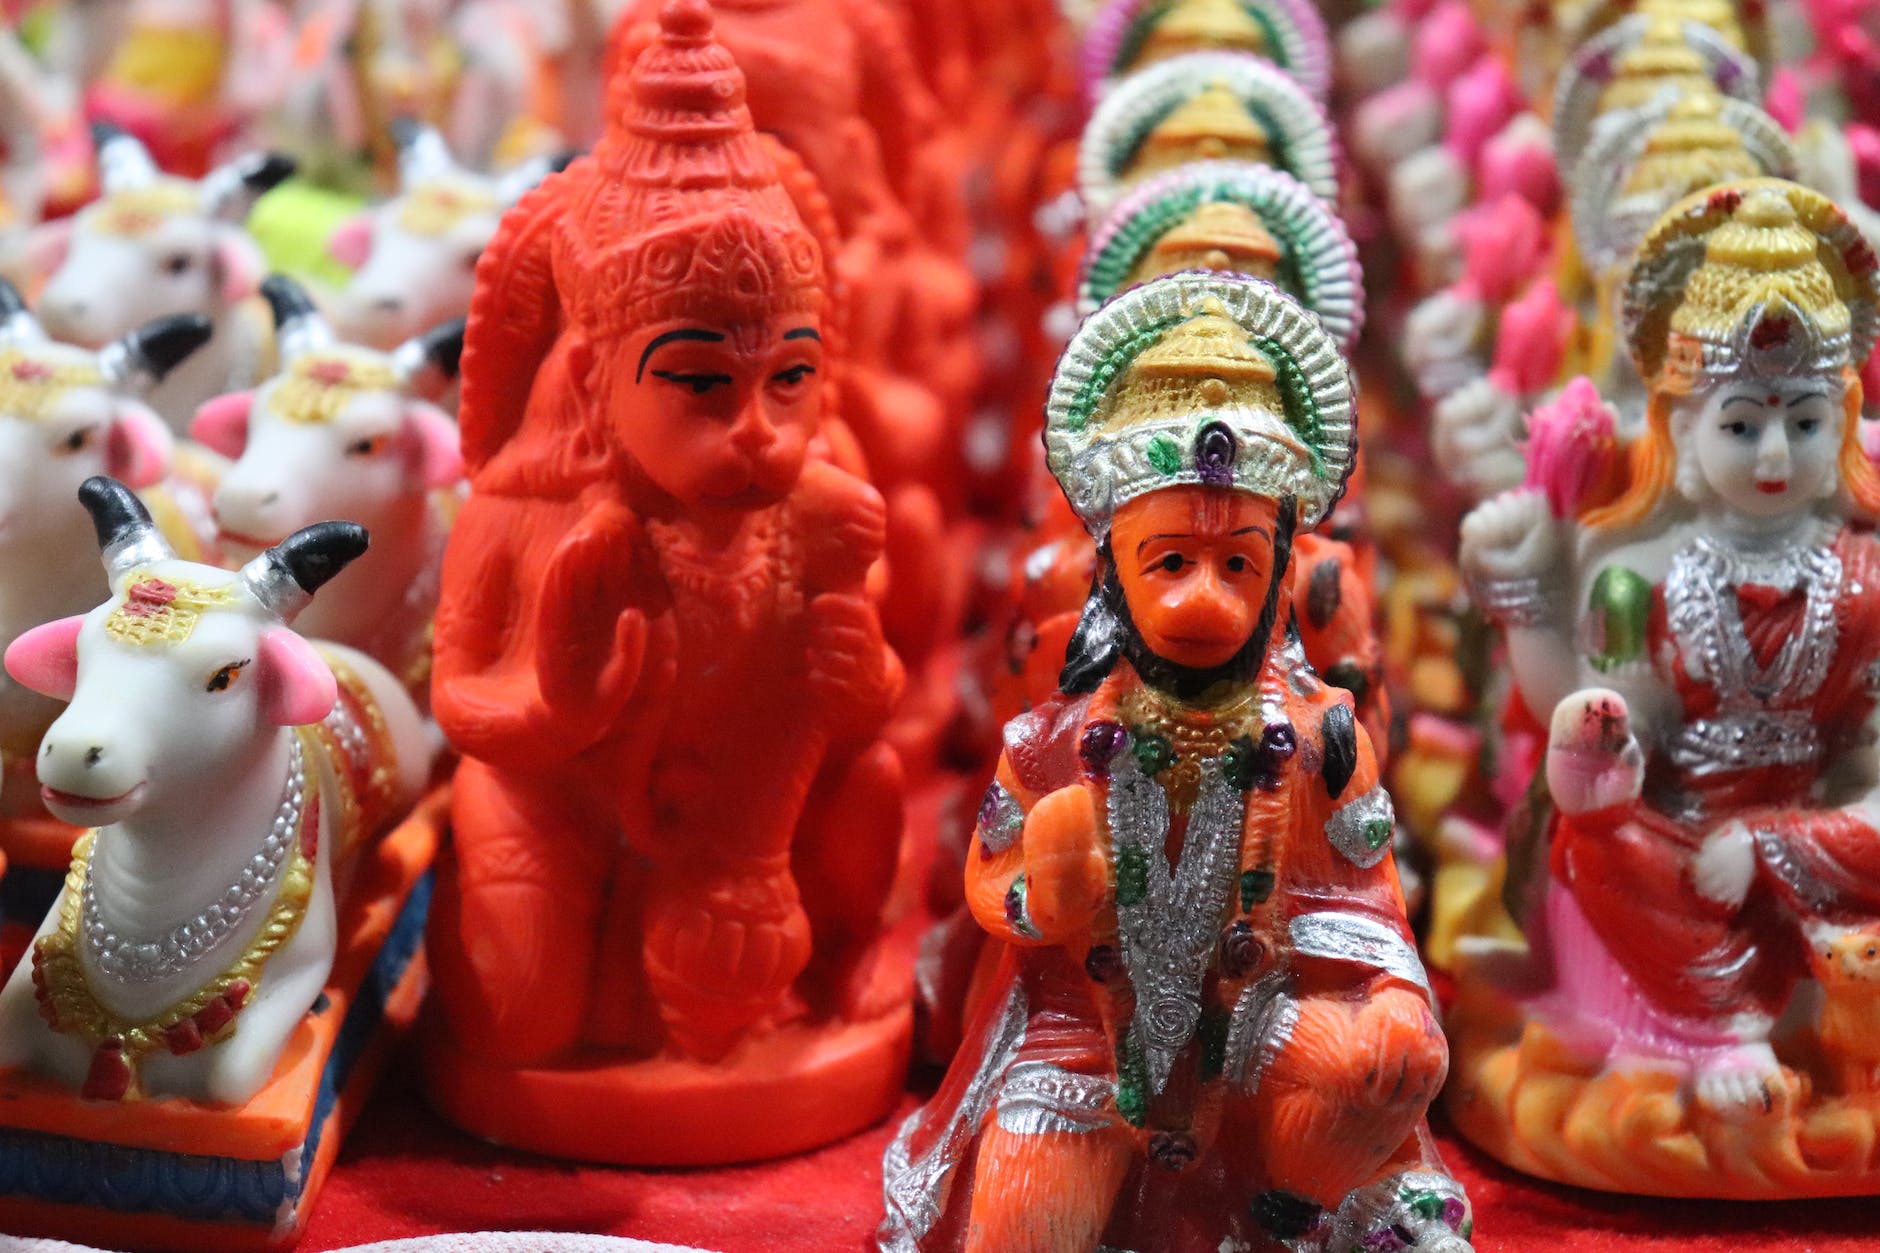 deity figurines in close up photography